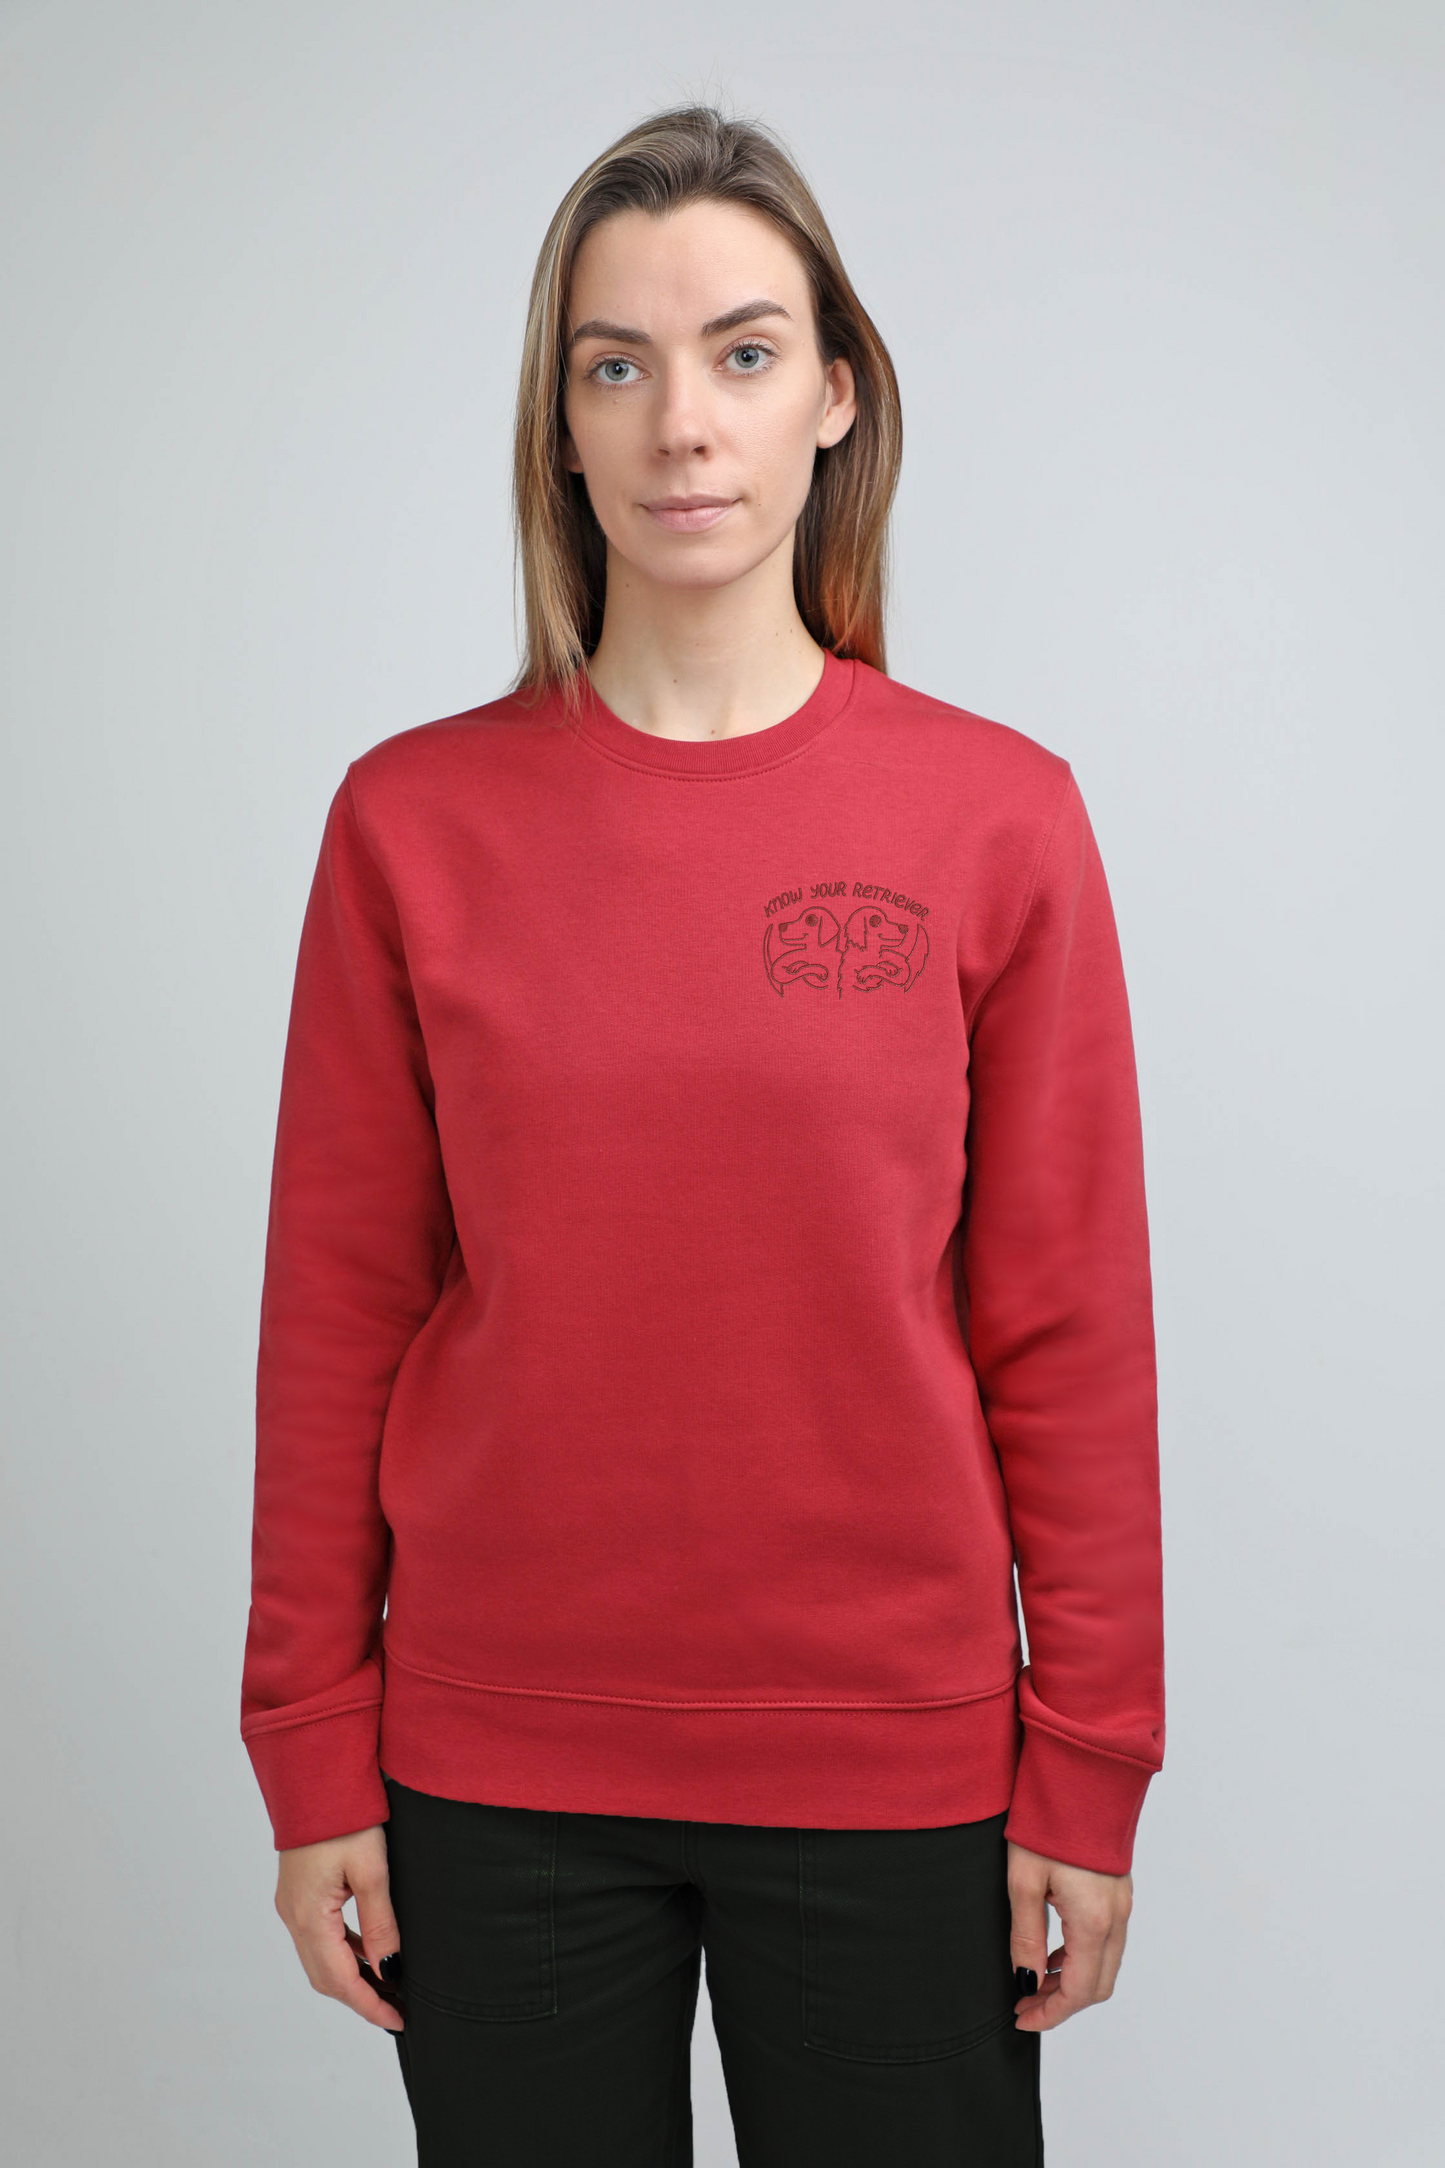 S available only | Know your retriever | Crew neck sweatshirt with embroidered dogs. Regular fit | Unisex by My Wild Other